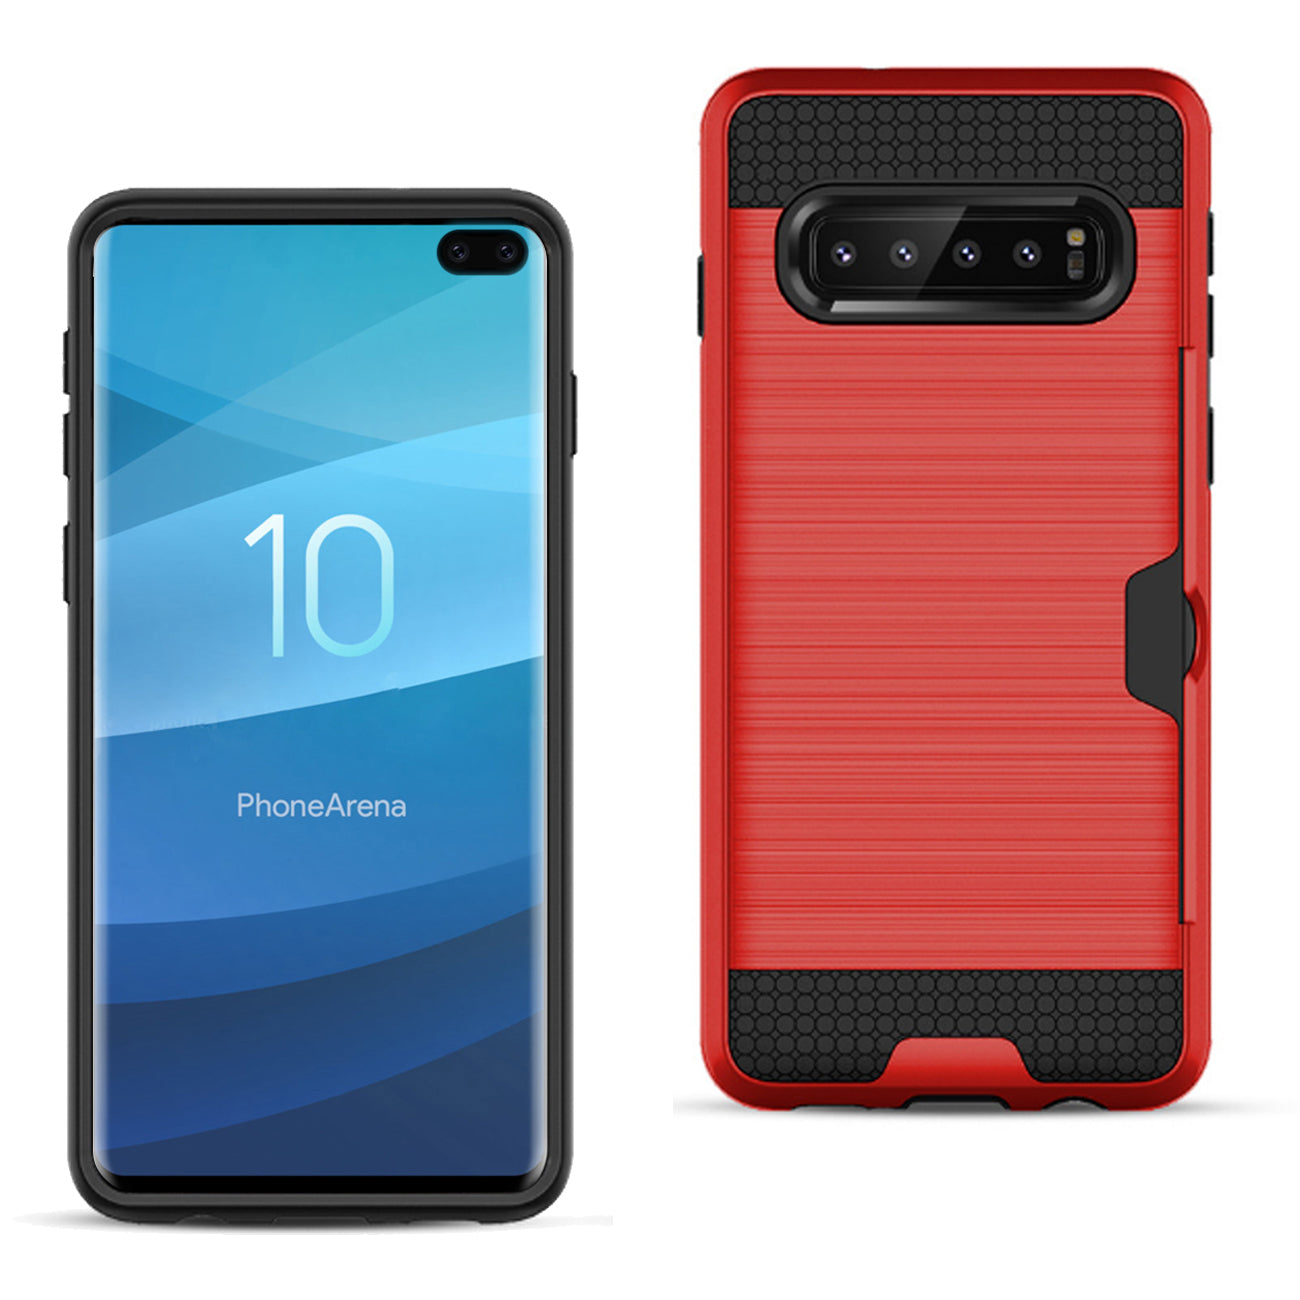 SAMSUNG GALAXY S10 Plus Slim Armor Hybrid Case With Card Holder In Red